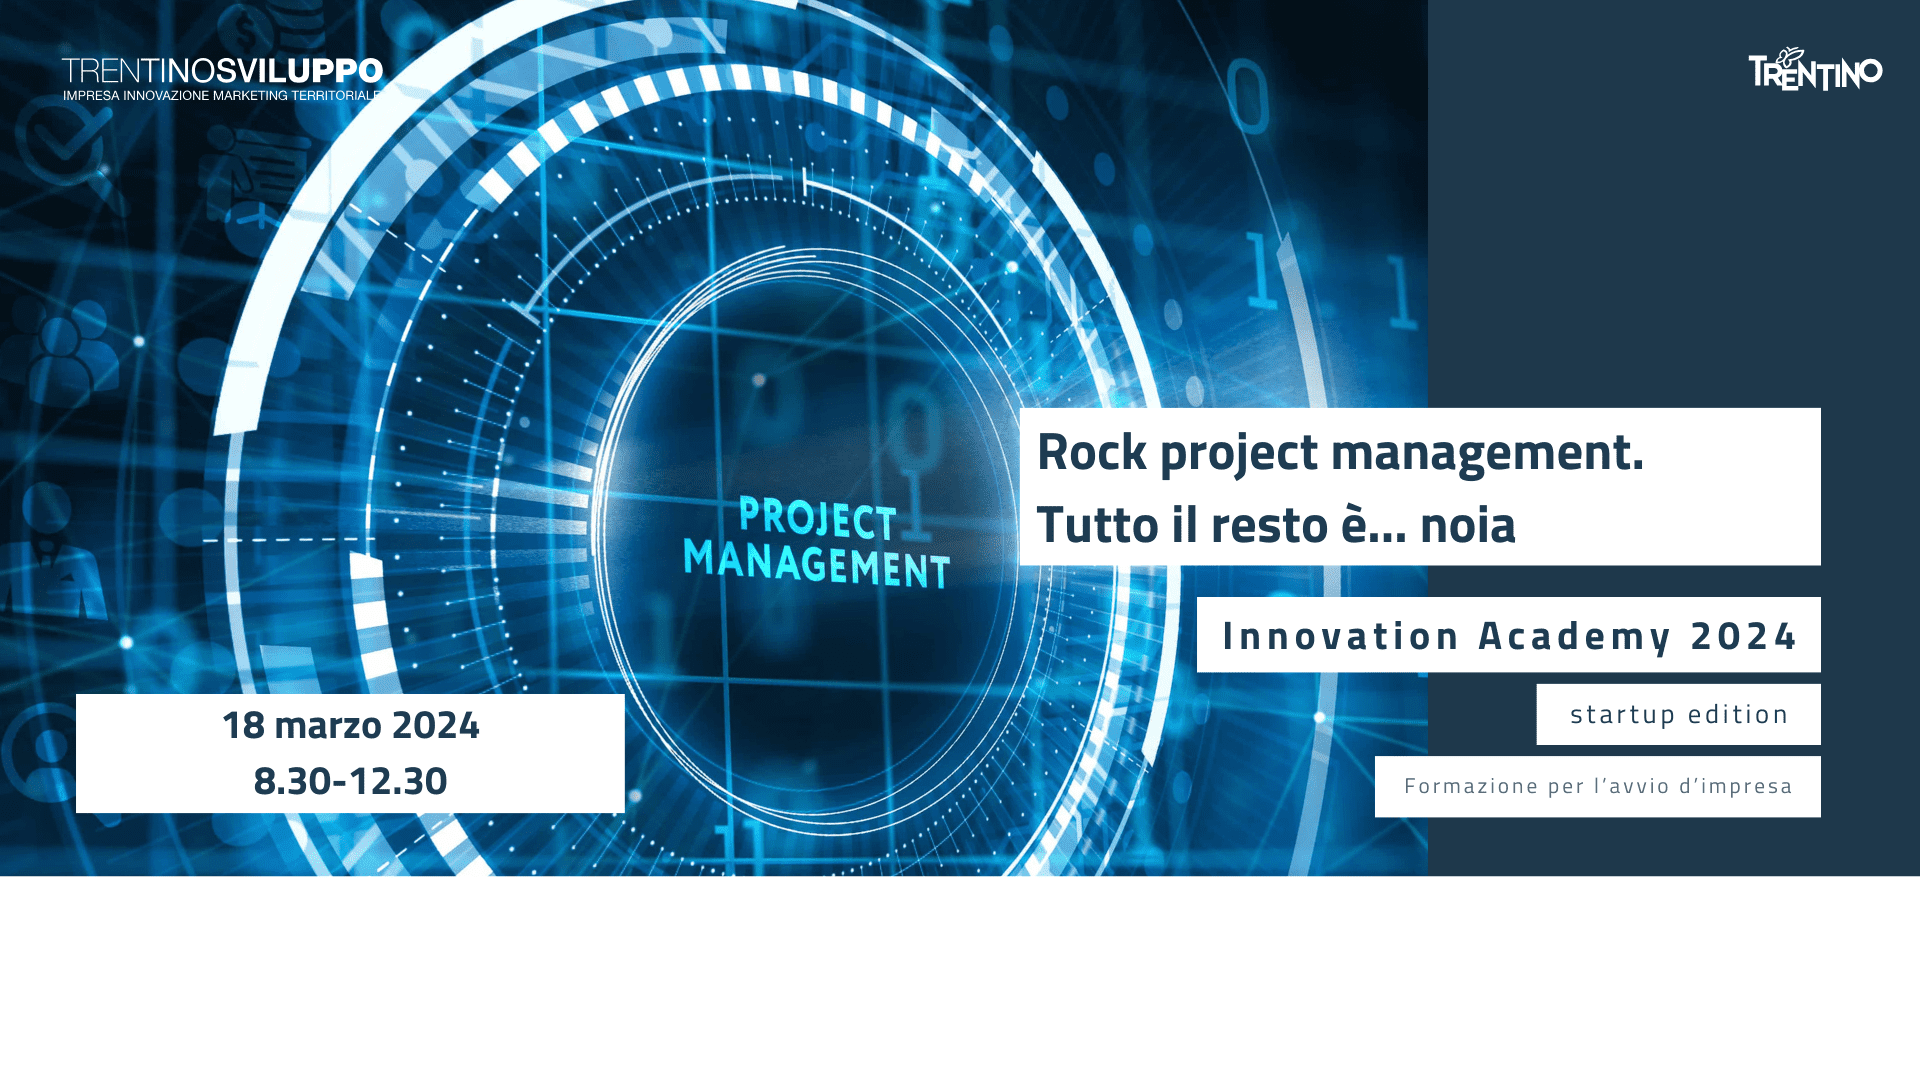 Rock project management - Innovation Academy